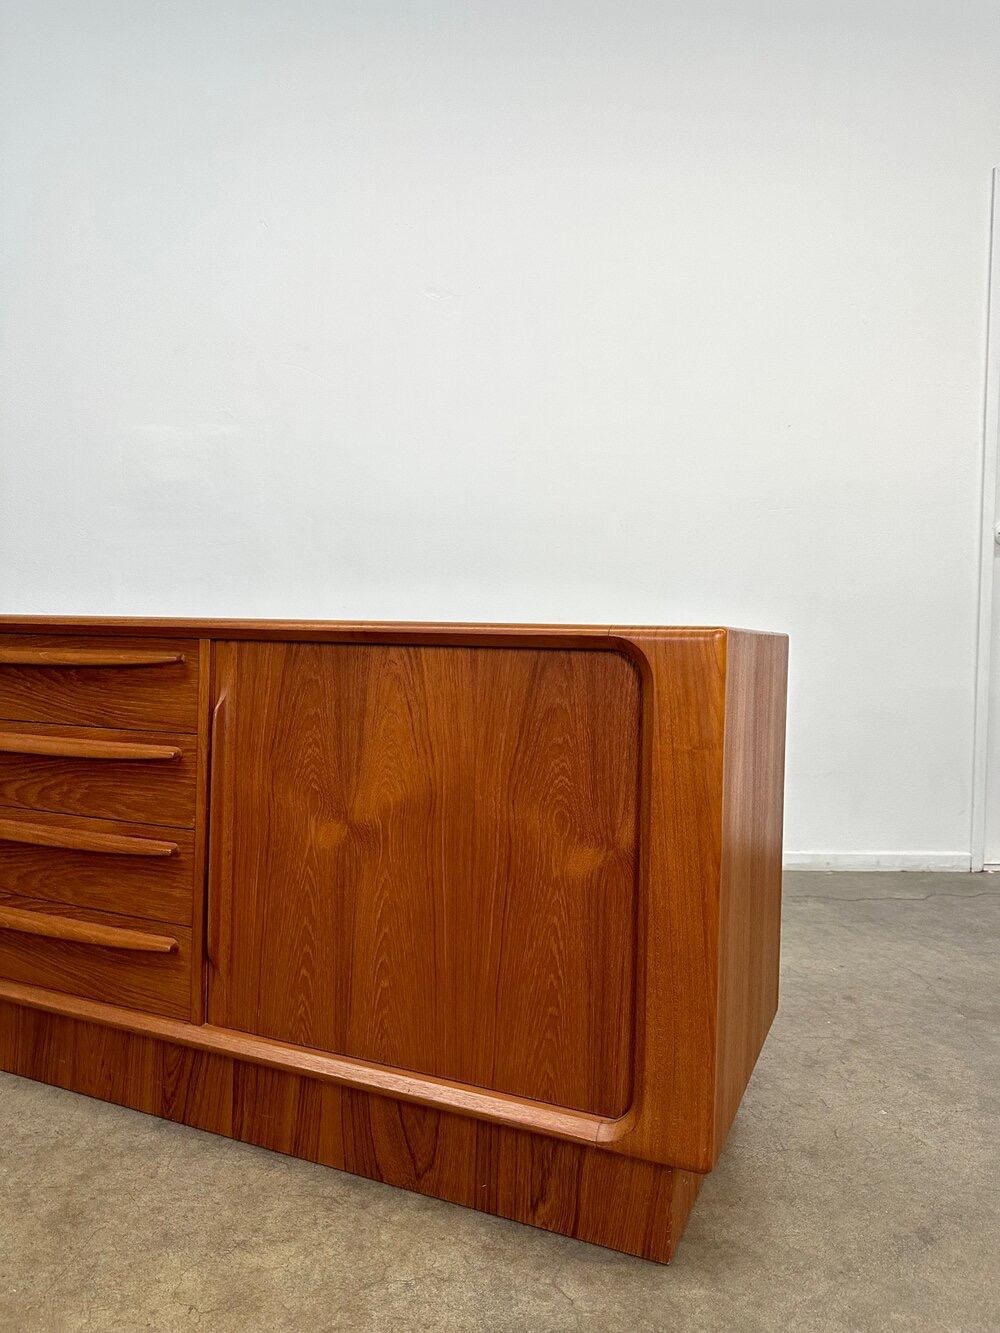 Mid-20th Century Danish Tambour Credenza with Plinth Base